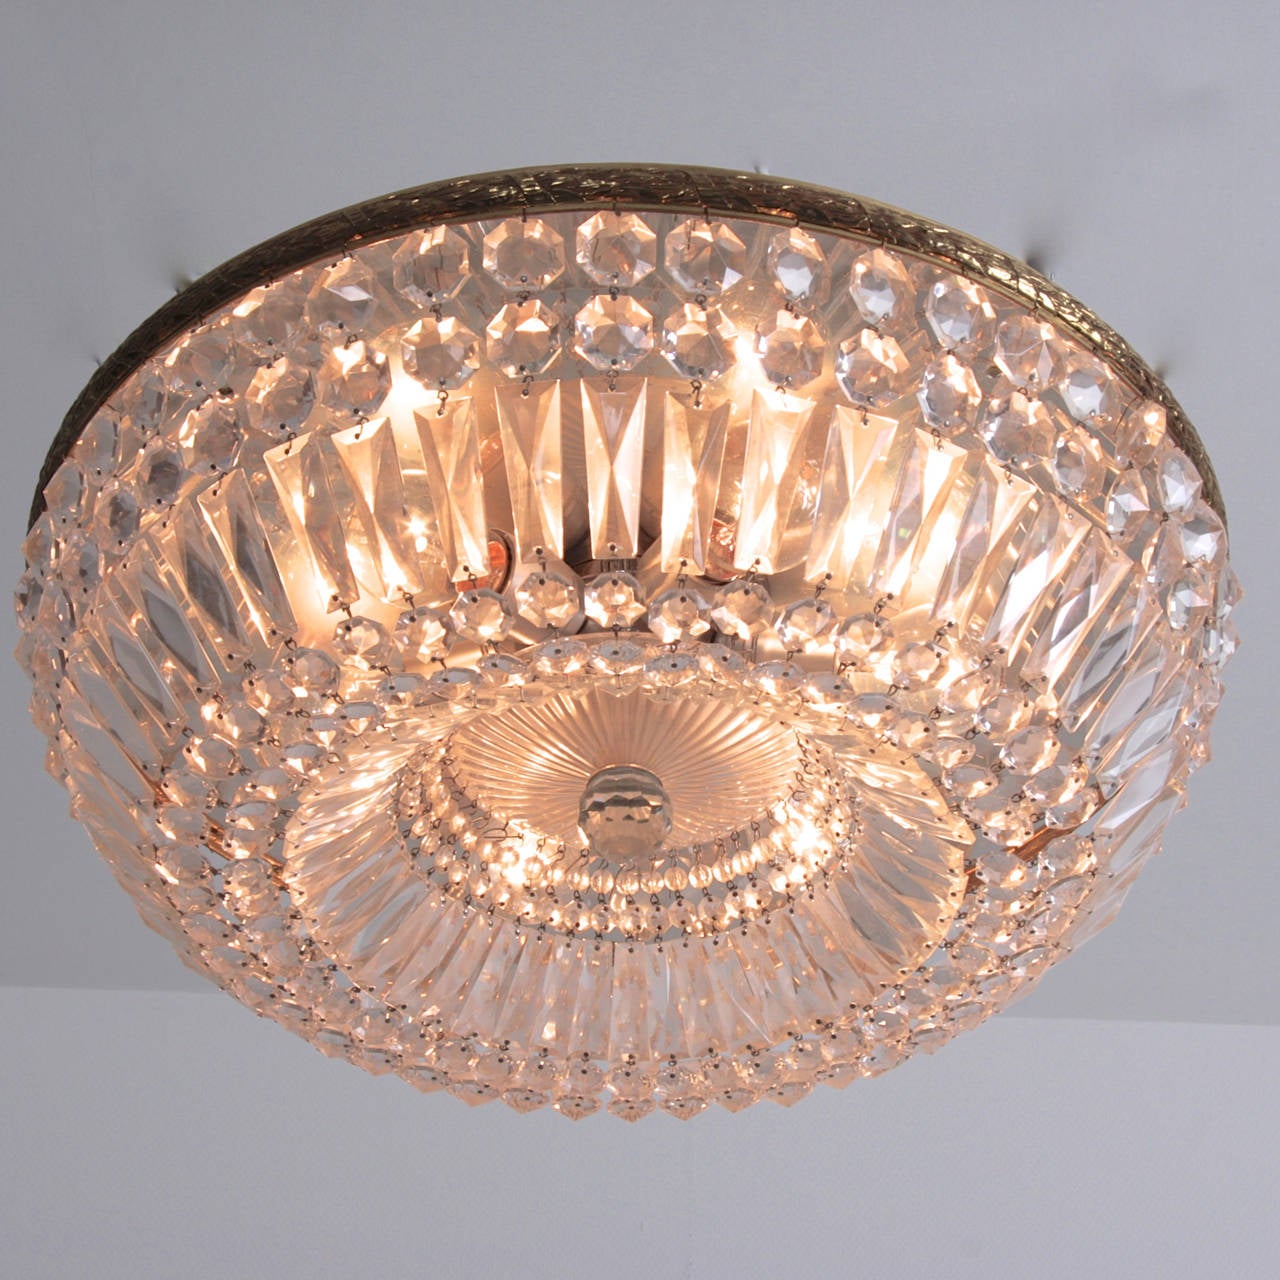 Mid-20th Century Very Large Crystal Glass and Brass Ceiling Mount Fixture or Flush Lamp by Palwa